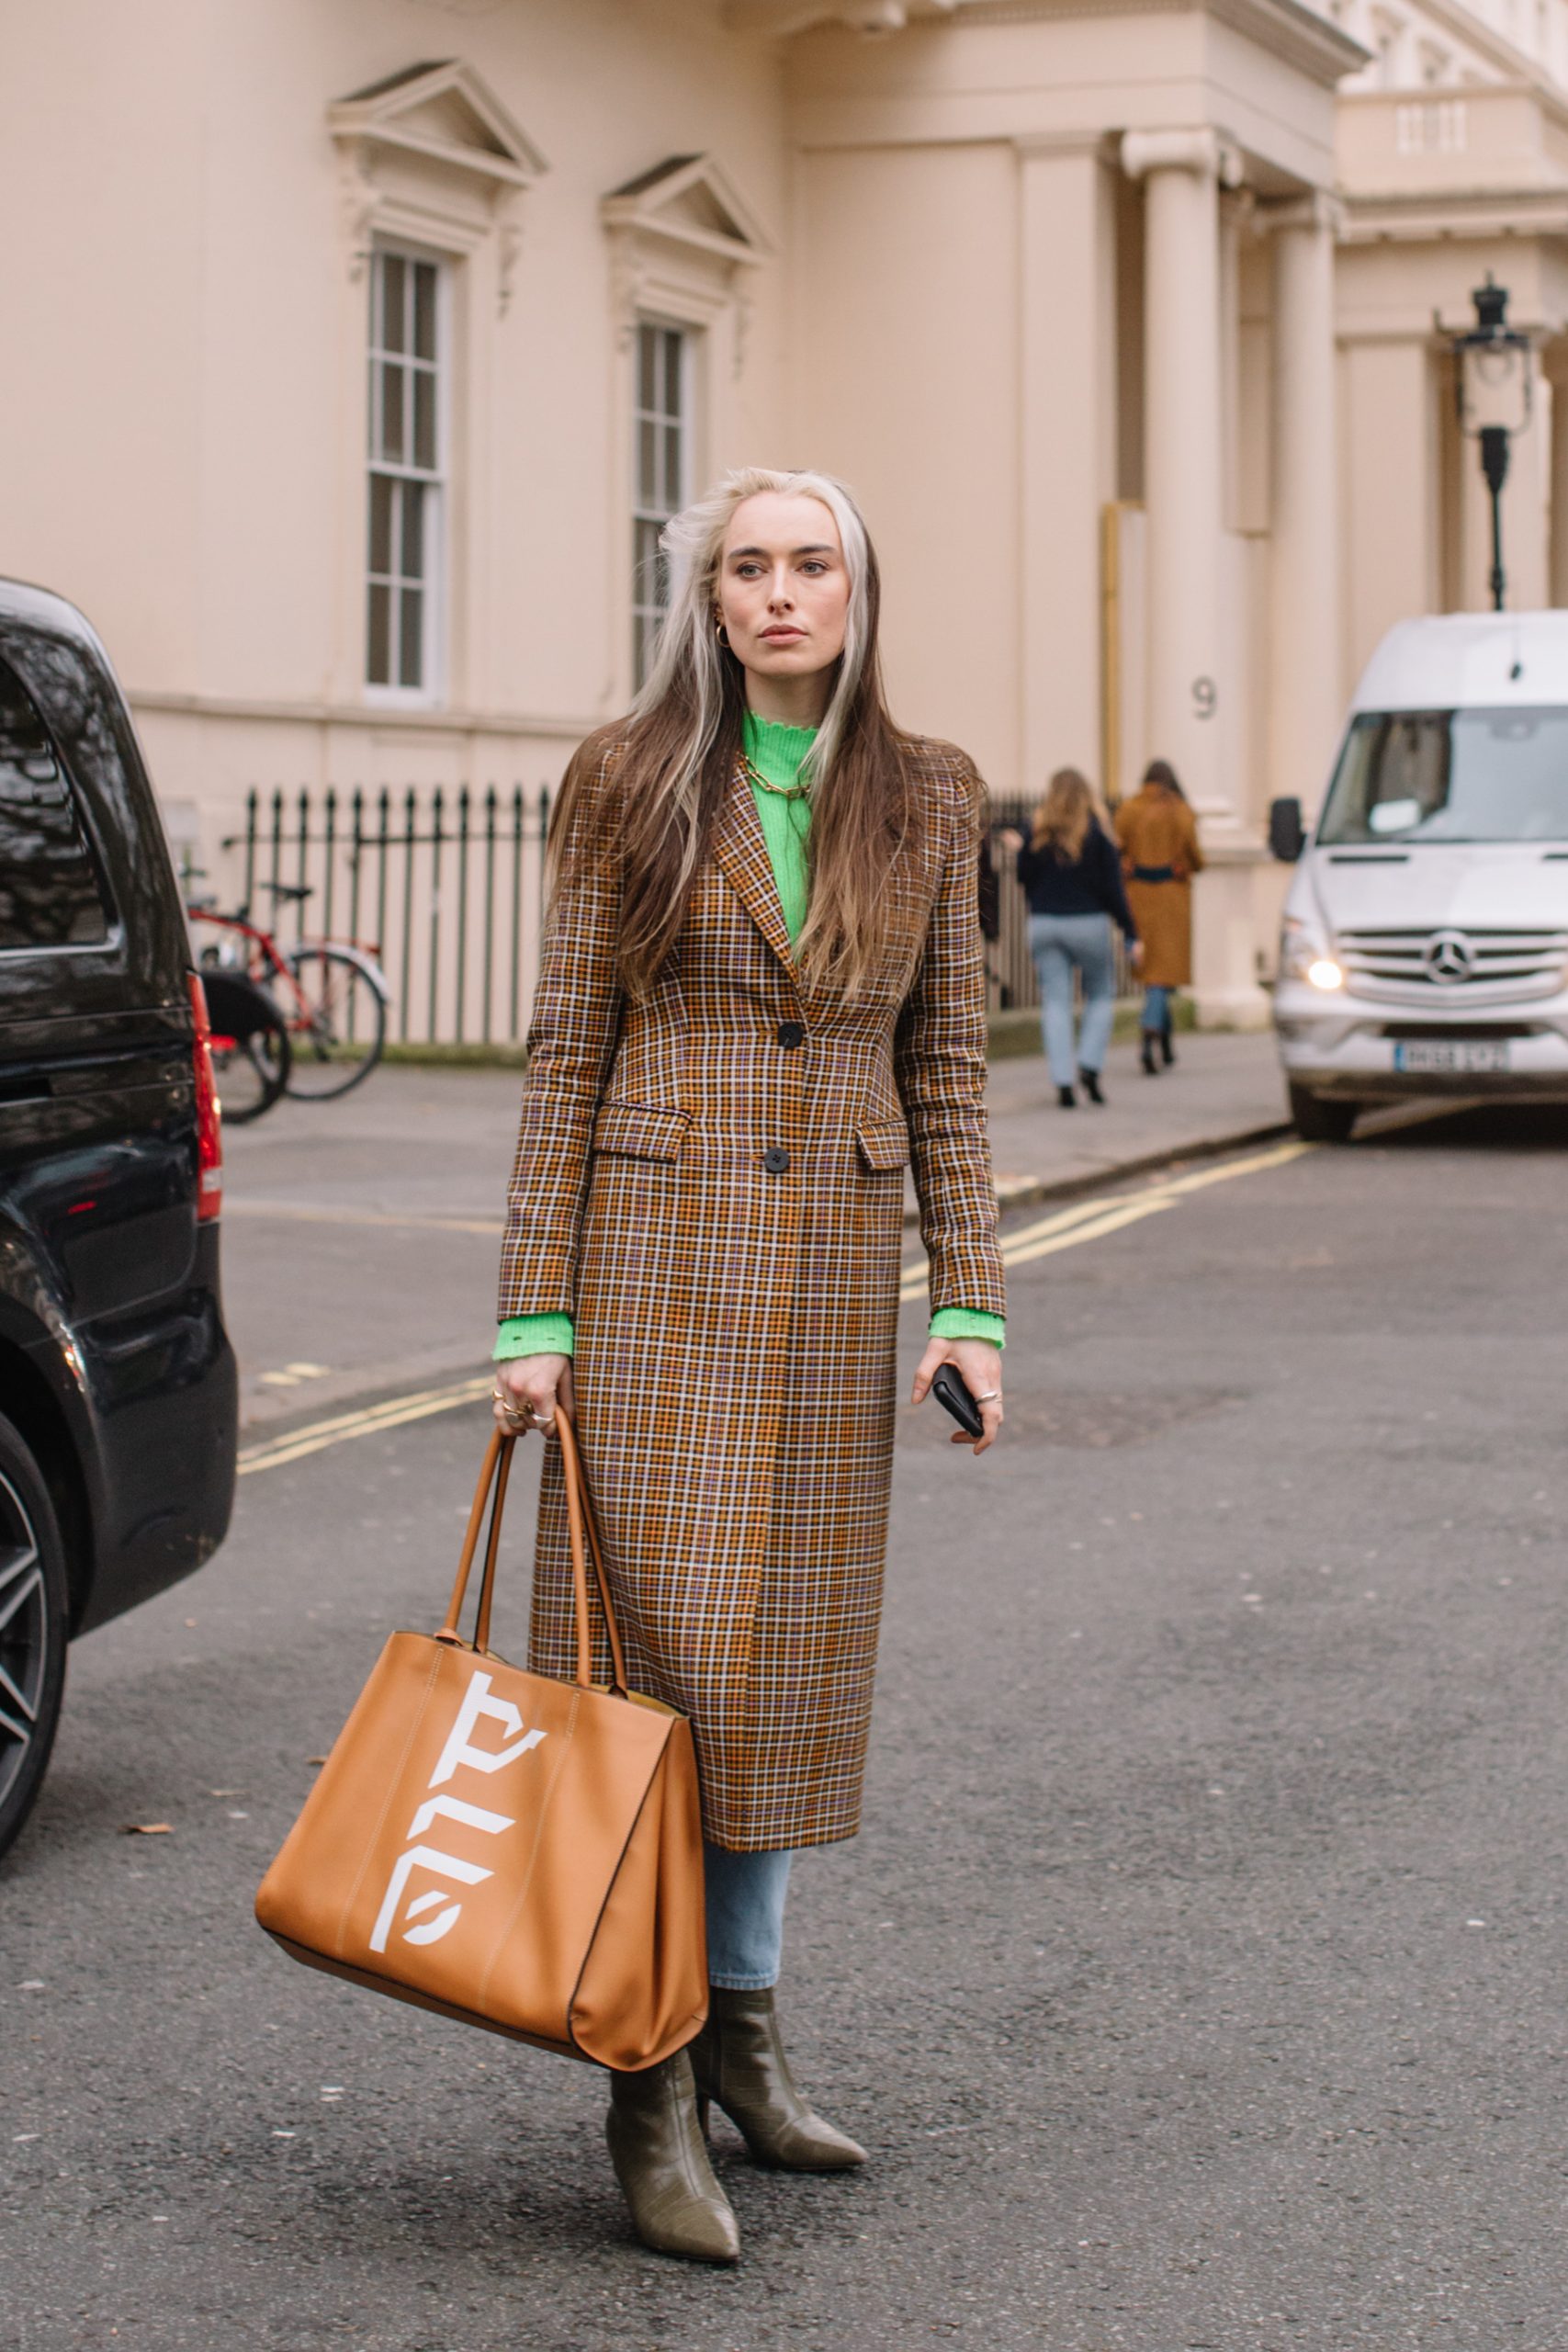 London Street Style Influencer Looks Fall 2020 | The Impression